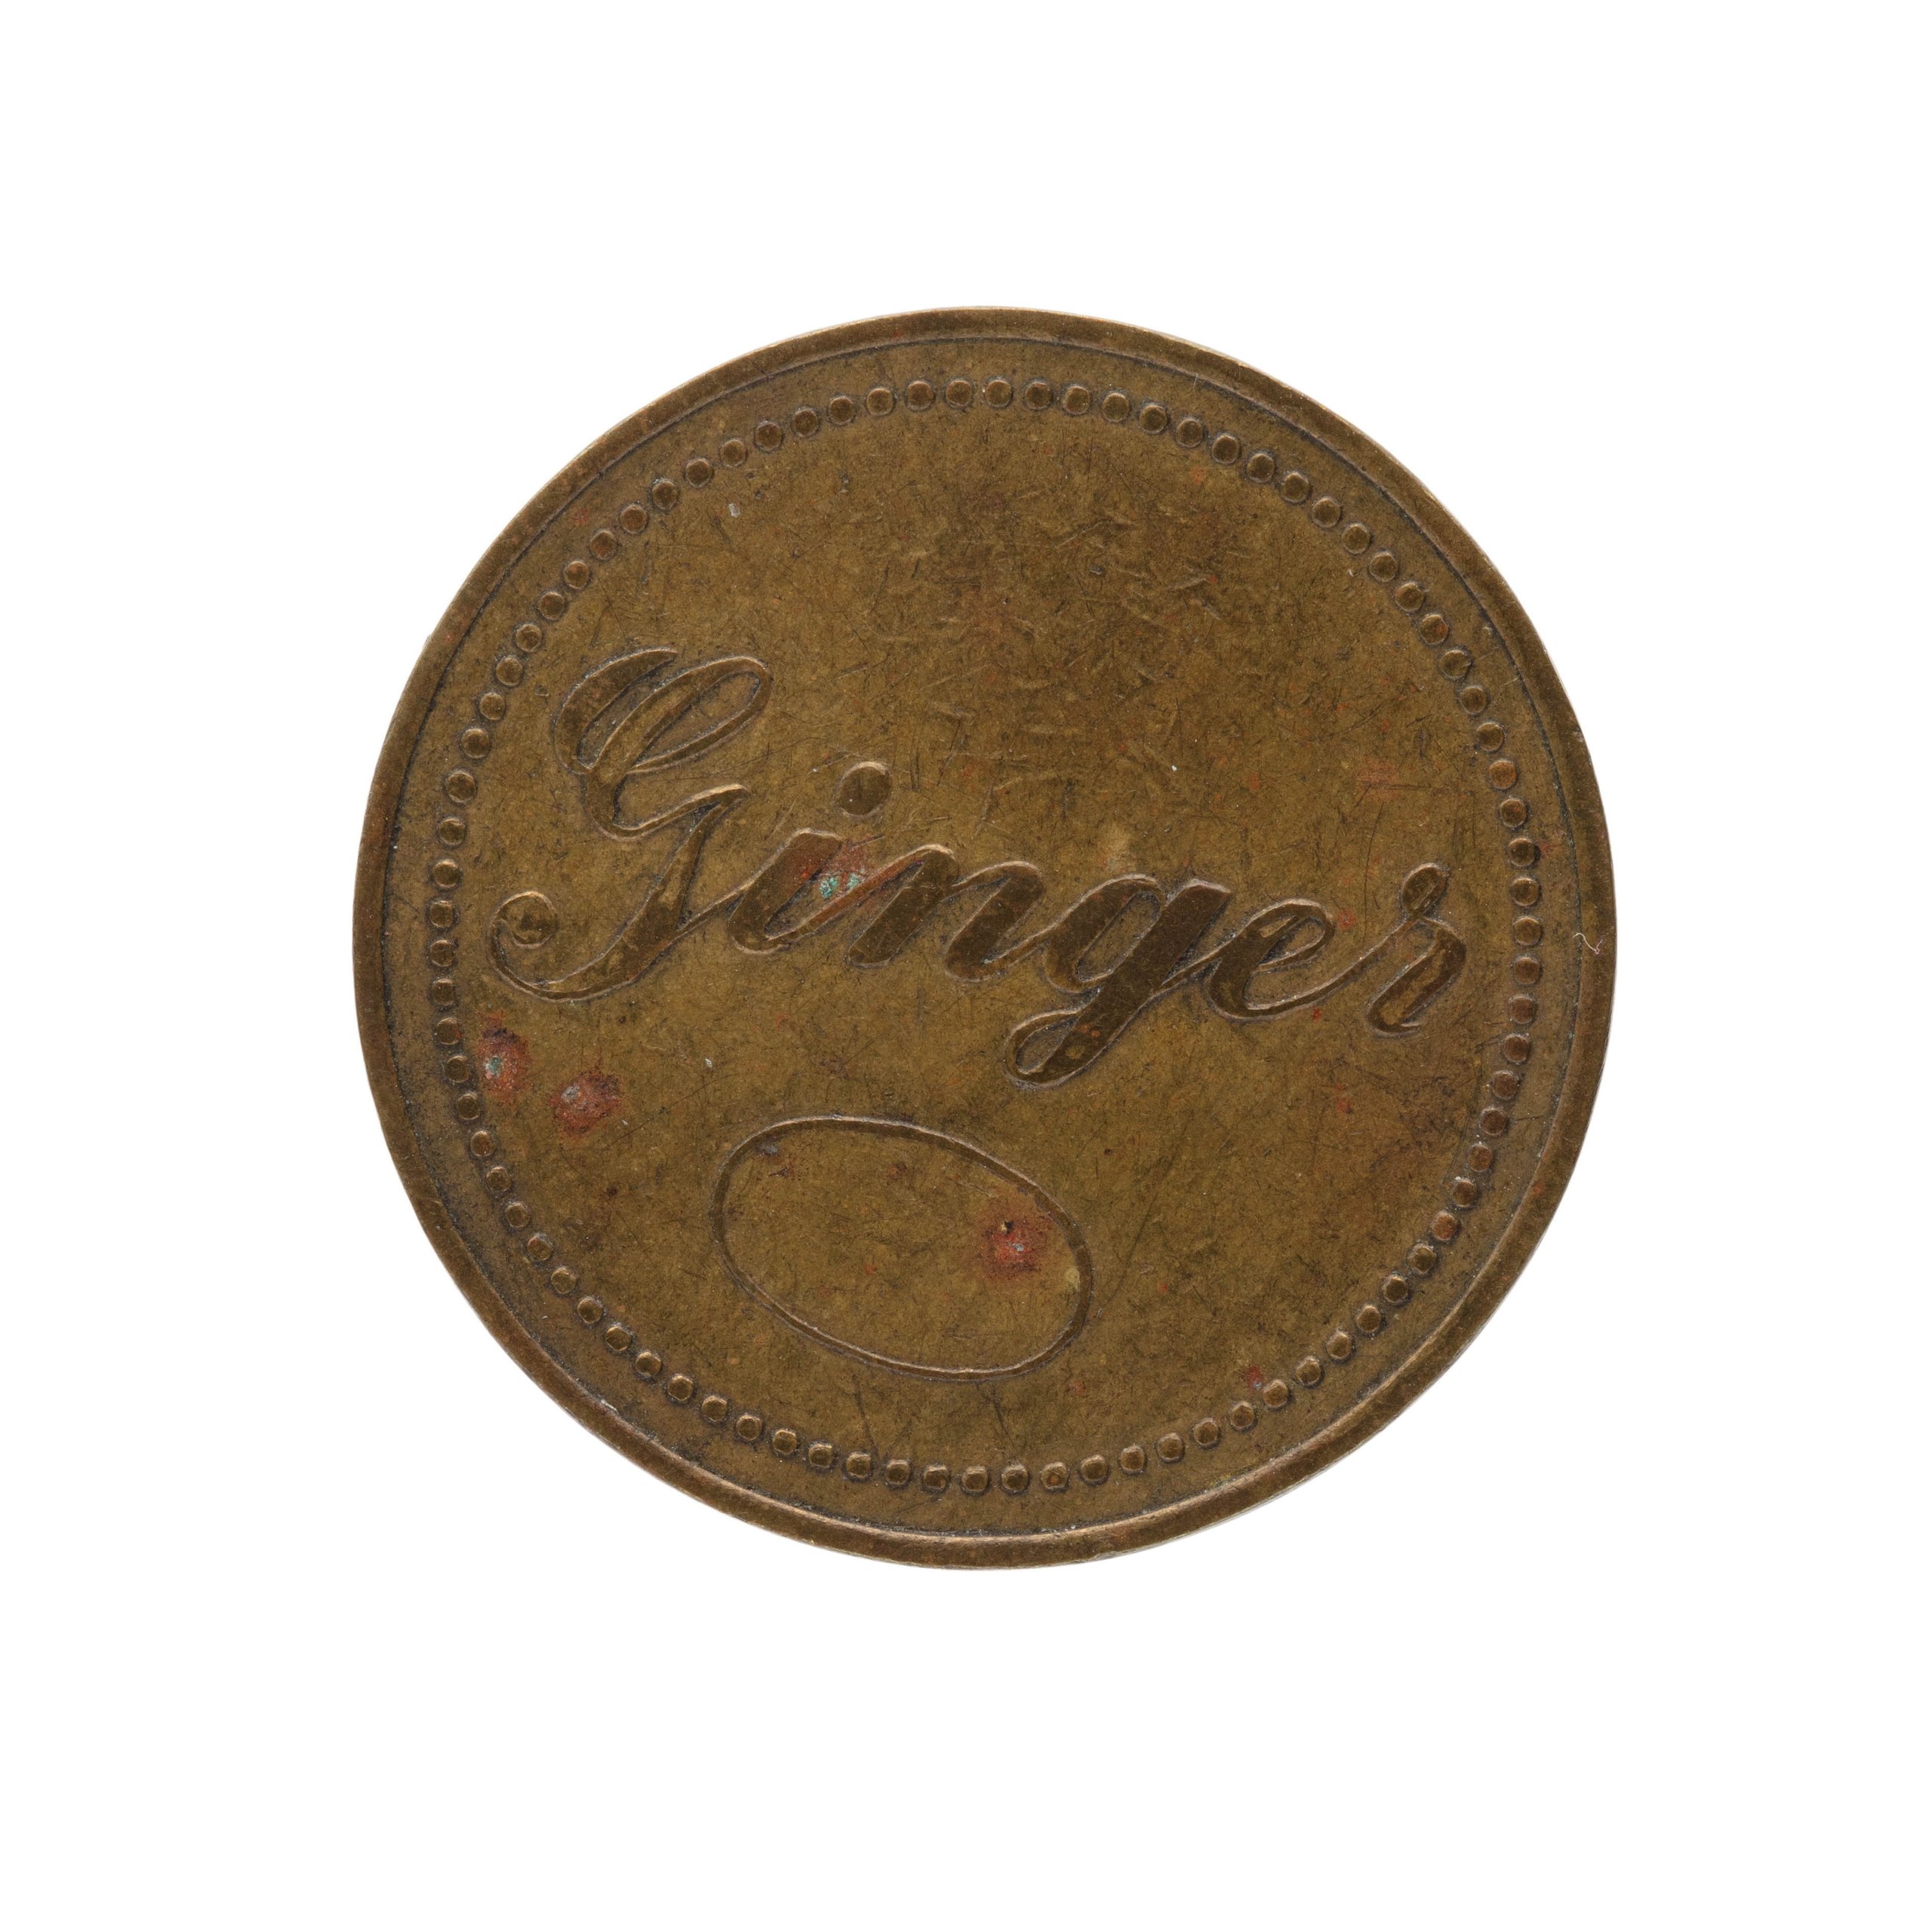 'Ginger' token issued by Groetchen Tool & Mfg Co